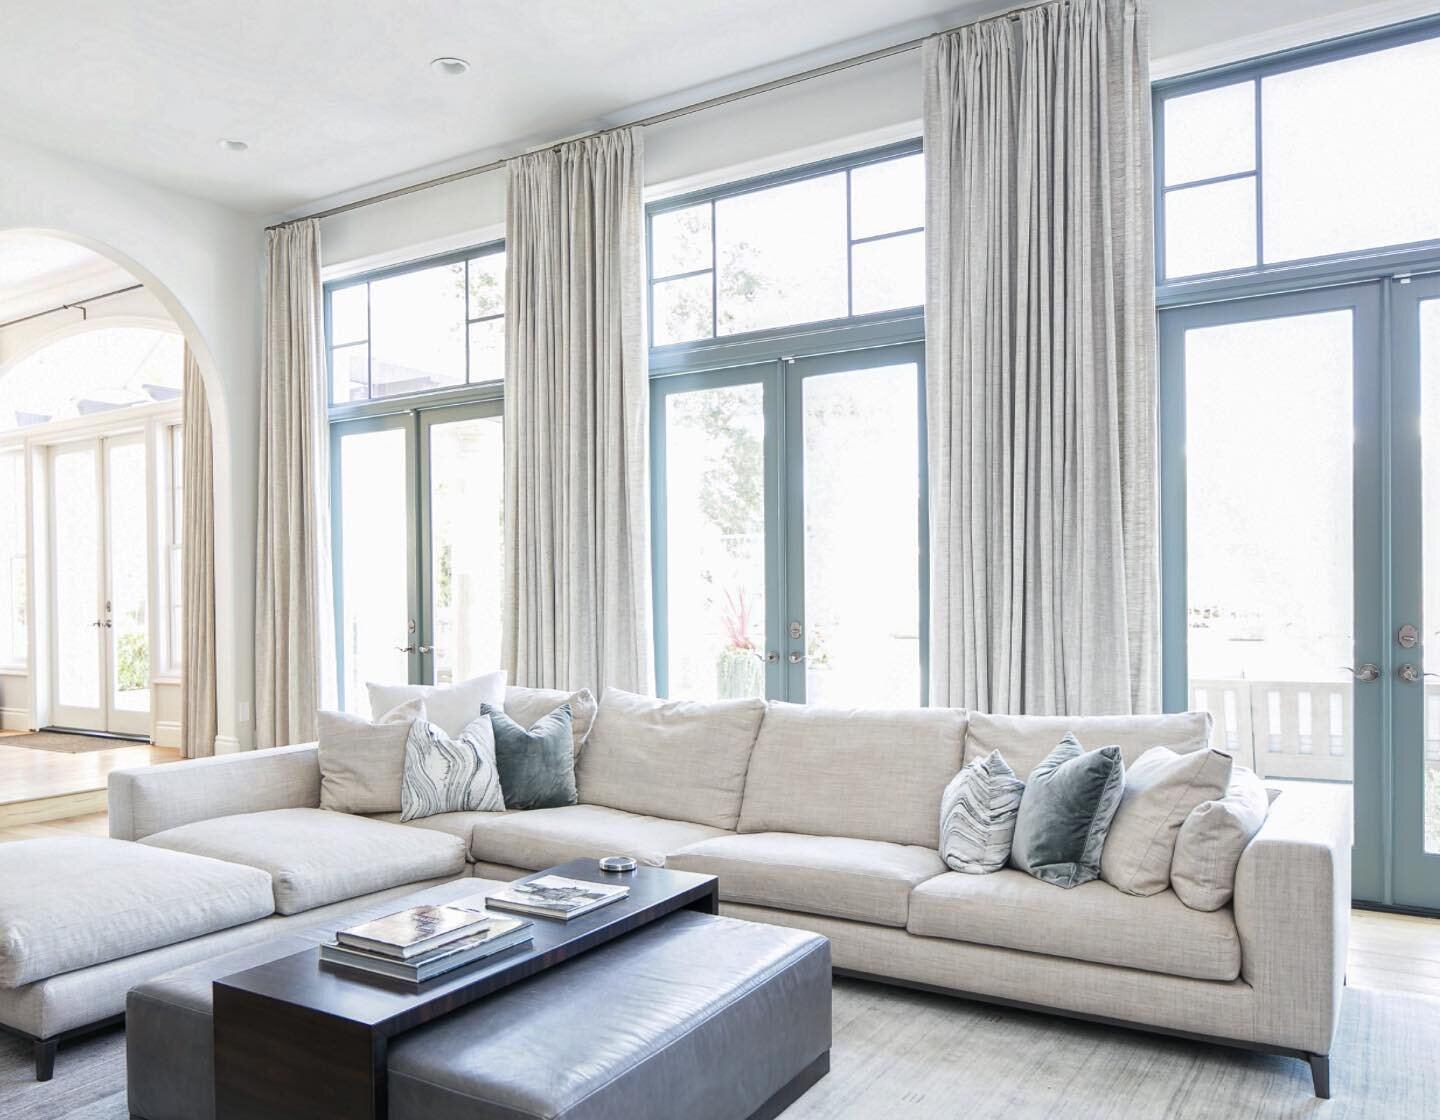 Sliding/accordion doors are amazing, but a set of three French doors is just as good in my opinion. #interiordesign #familyroom #sectional #interiordesignersofinsta